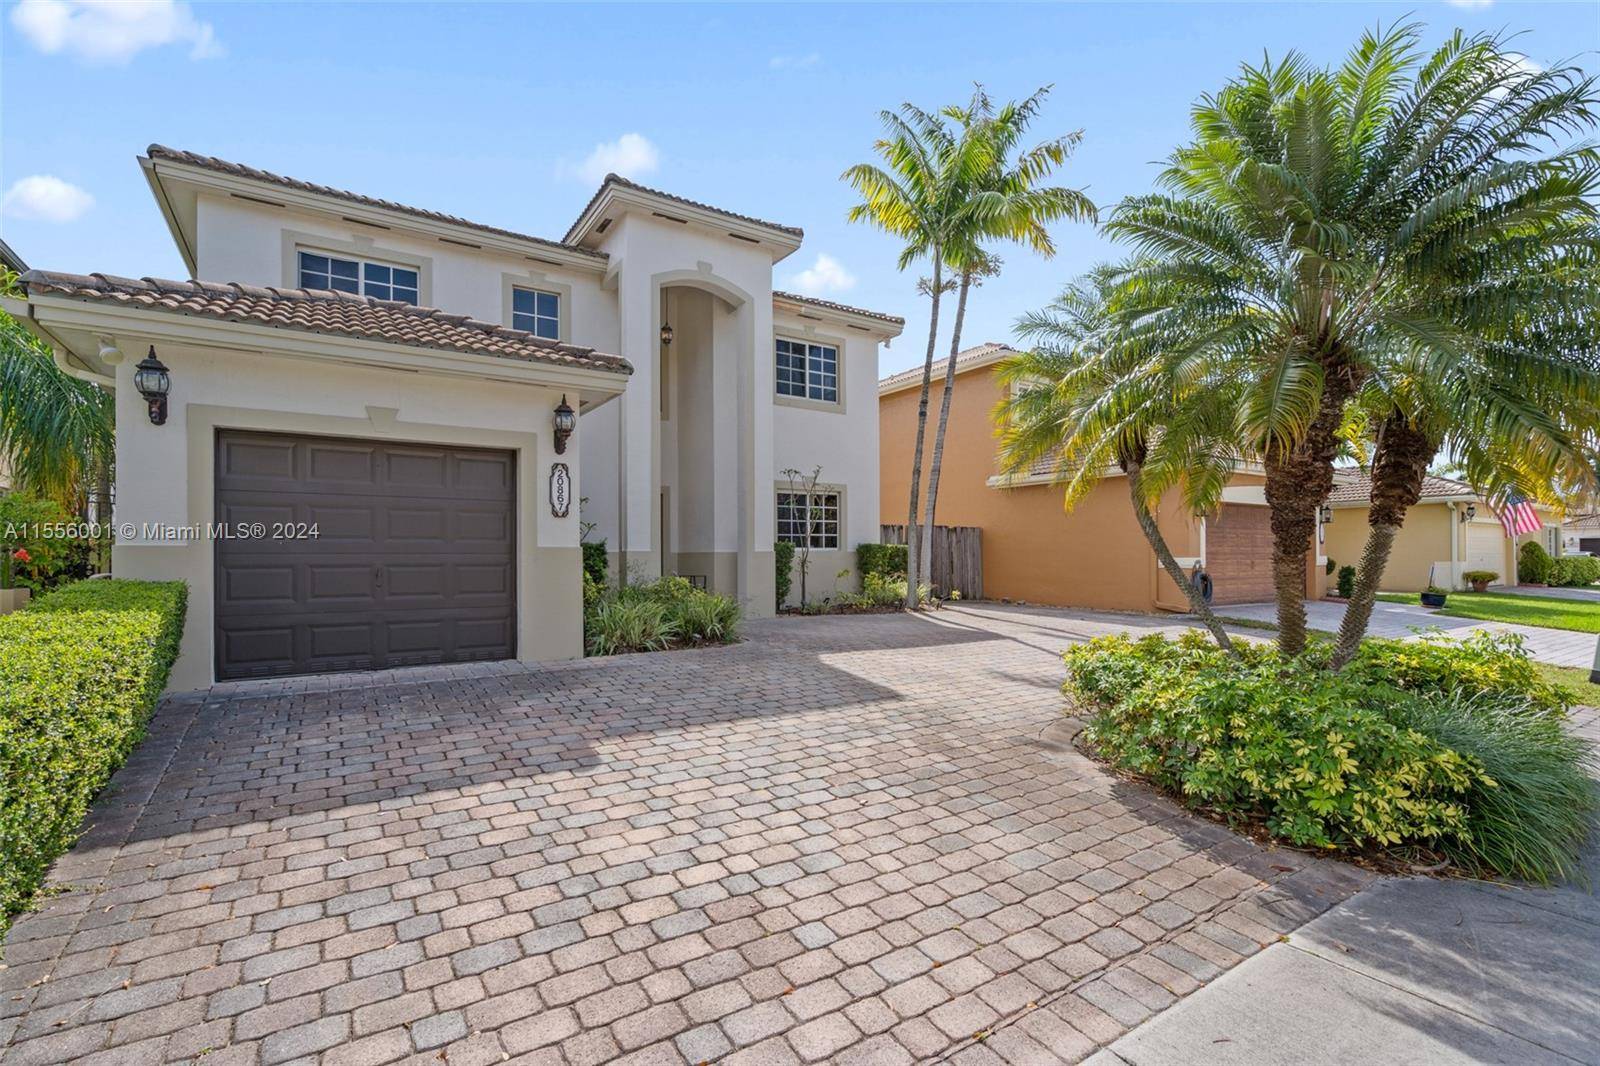 Welcome to your dream home in the serene community of Pelican Bay at Old Cutler Lakes.